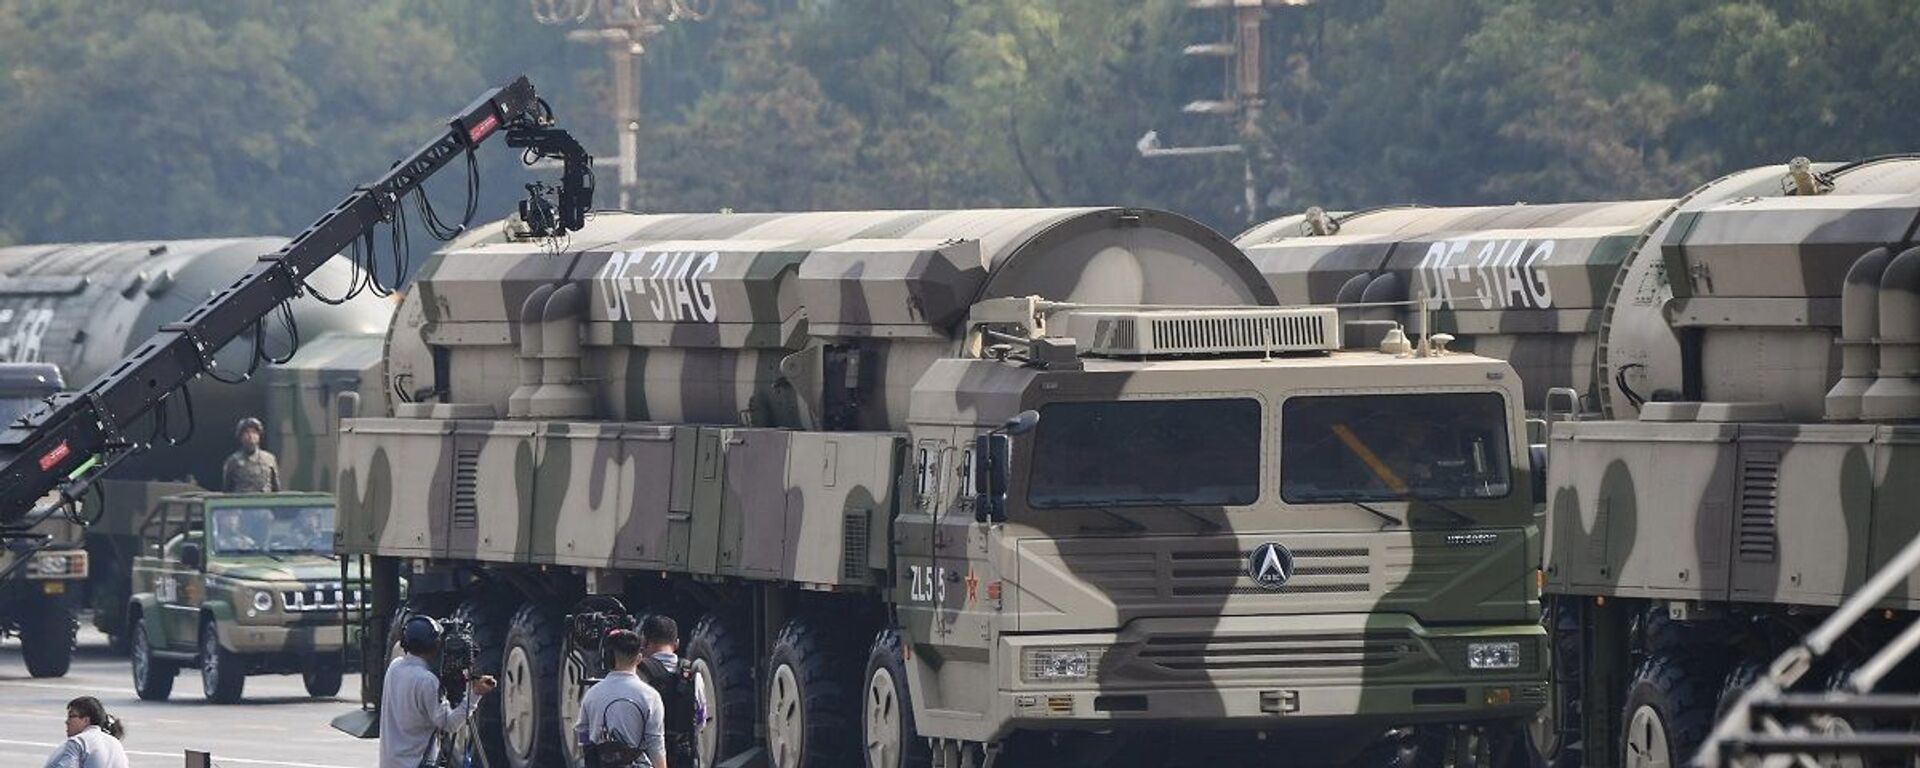 Military vehicles carrying DF-31AG intercontinental ballistic missiles participate in a military parade at Tiananmen Square in Beijing on October 1, 2019, to mark the 70th anniversary of the founding of the People’s Republic of China. - 俄罗斯卫星通讯社, 1920, 06.11.2021